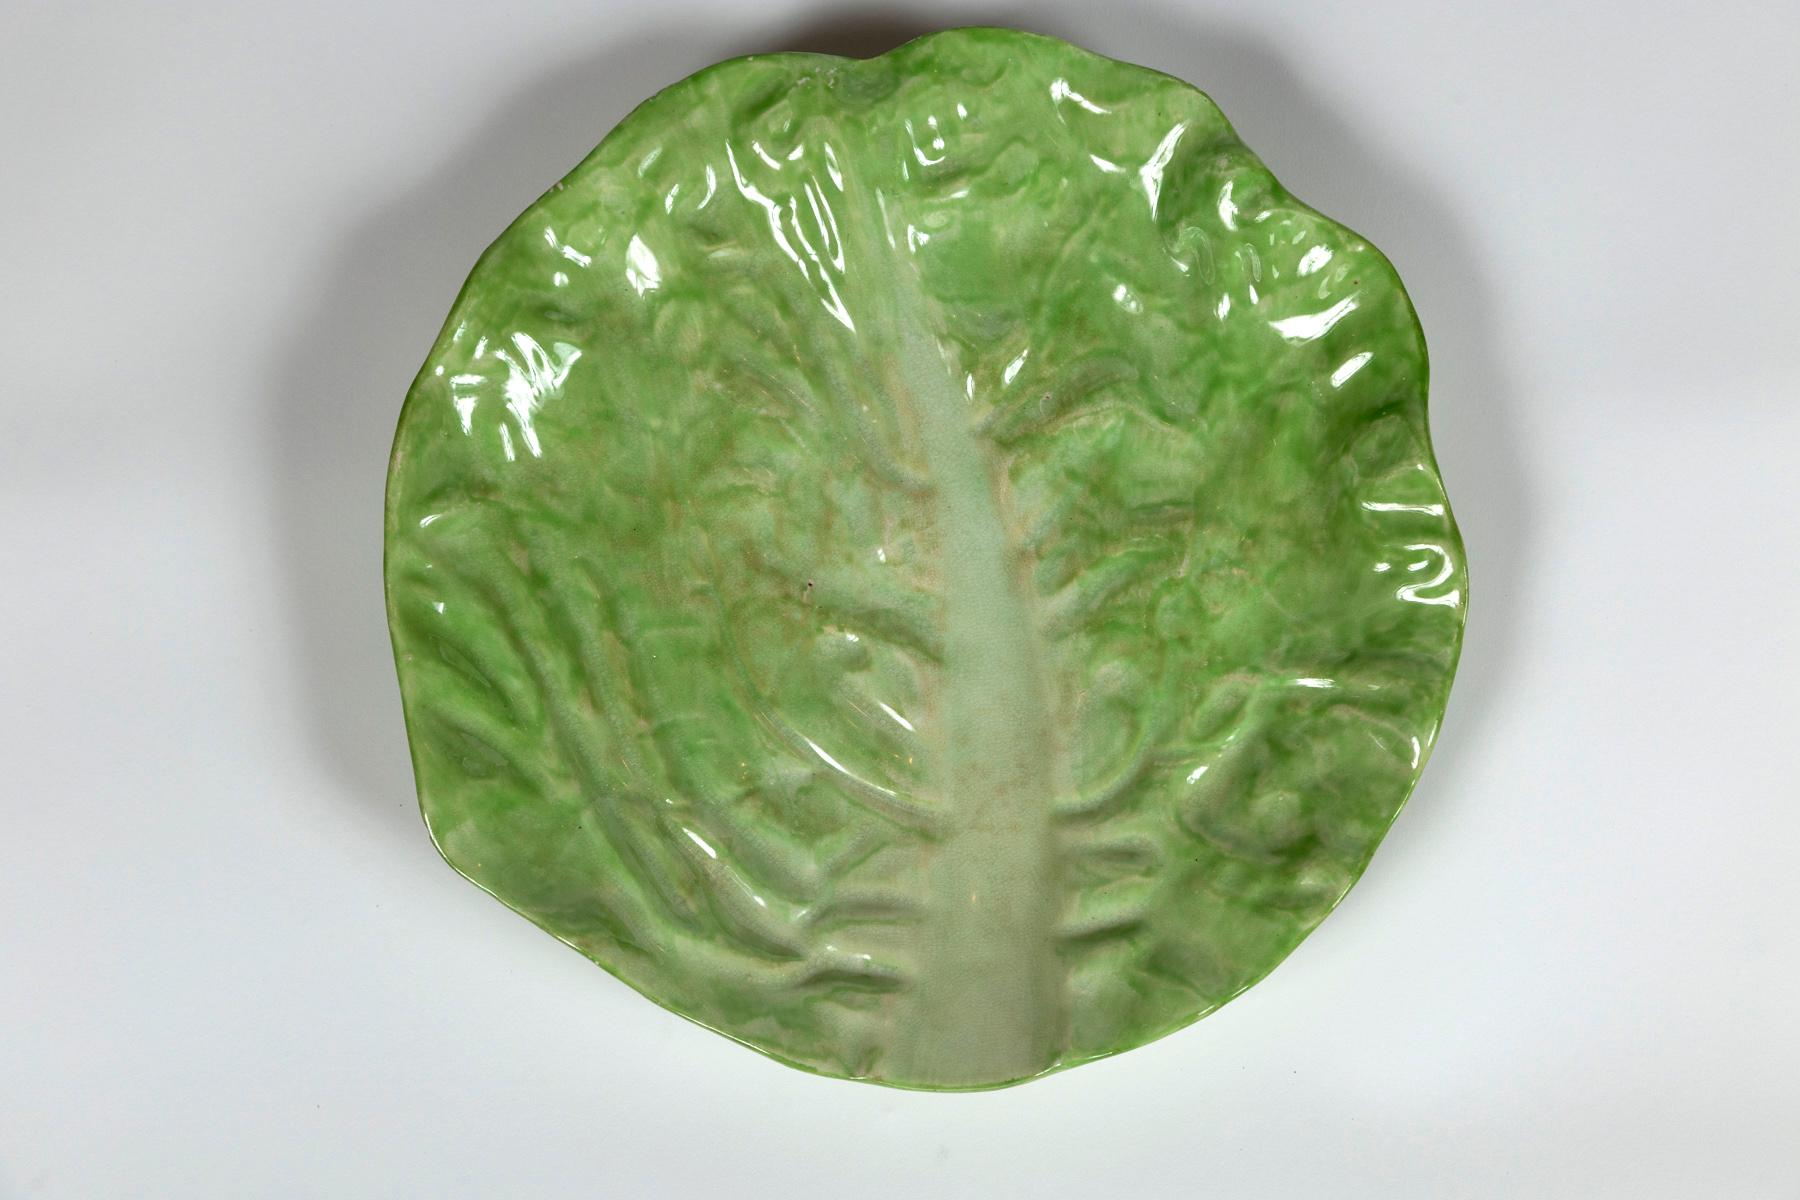 Antique Lettuce Leaf Platter, Wannopee Pottery, circa 1900. Striking green majolica glaze. Stamped TRADE 